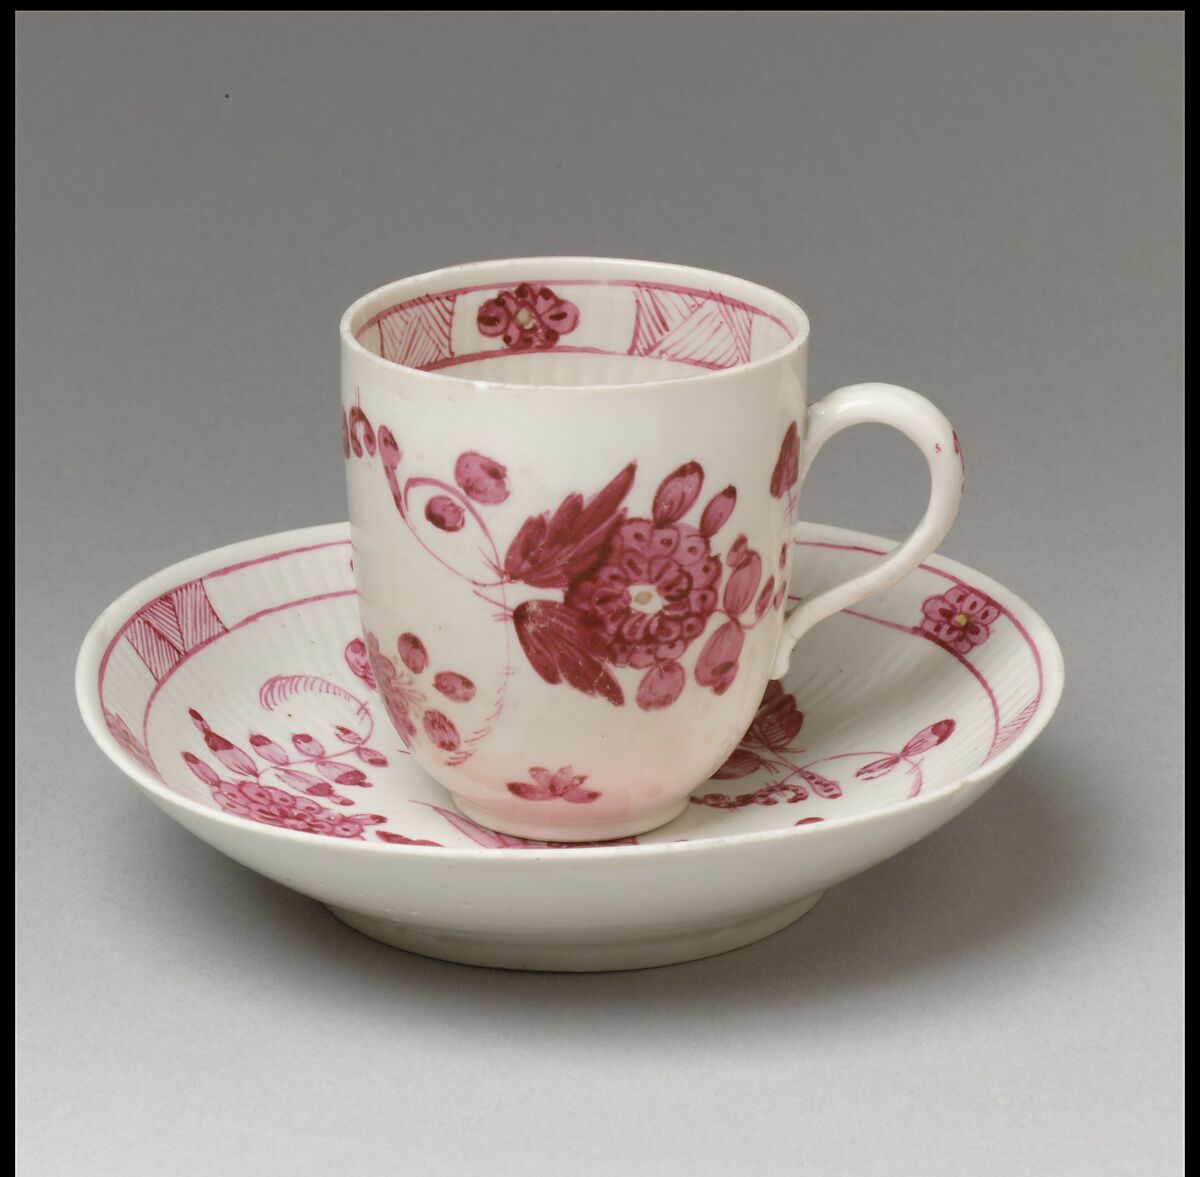 Cup and saucer, possibly Rauenstein Porcelain Manufactory, Hard-paste porcelain, German, possibly Thuringia, Rauenstein 